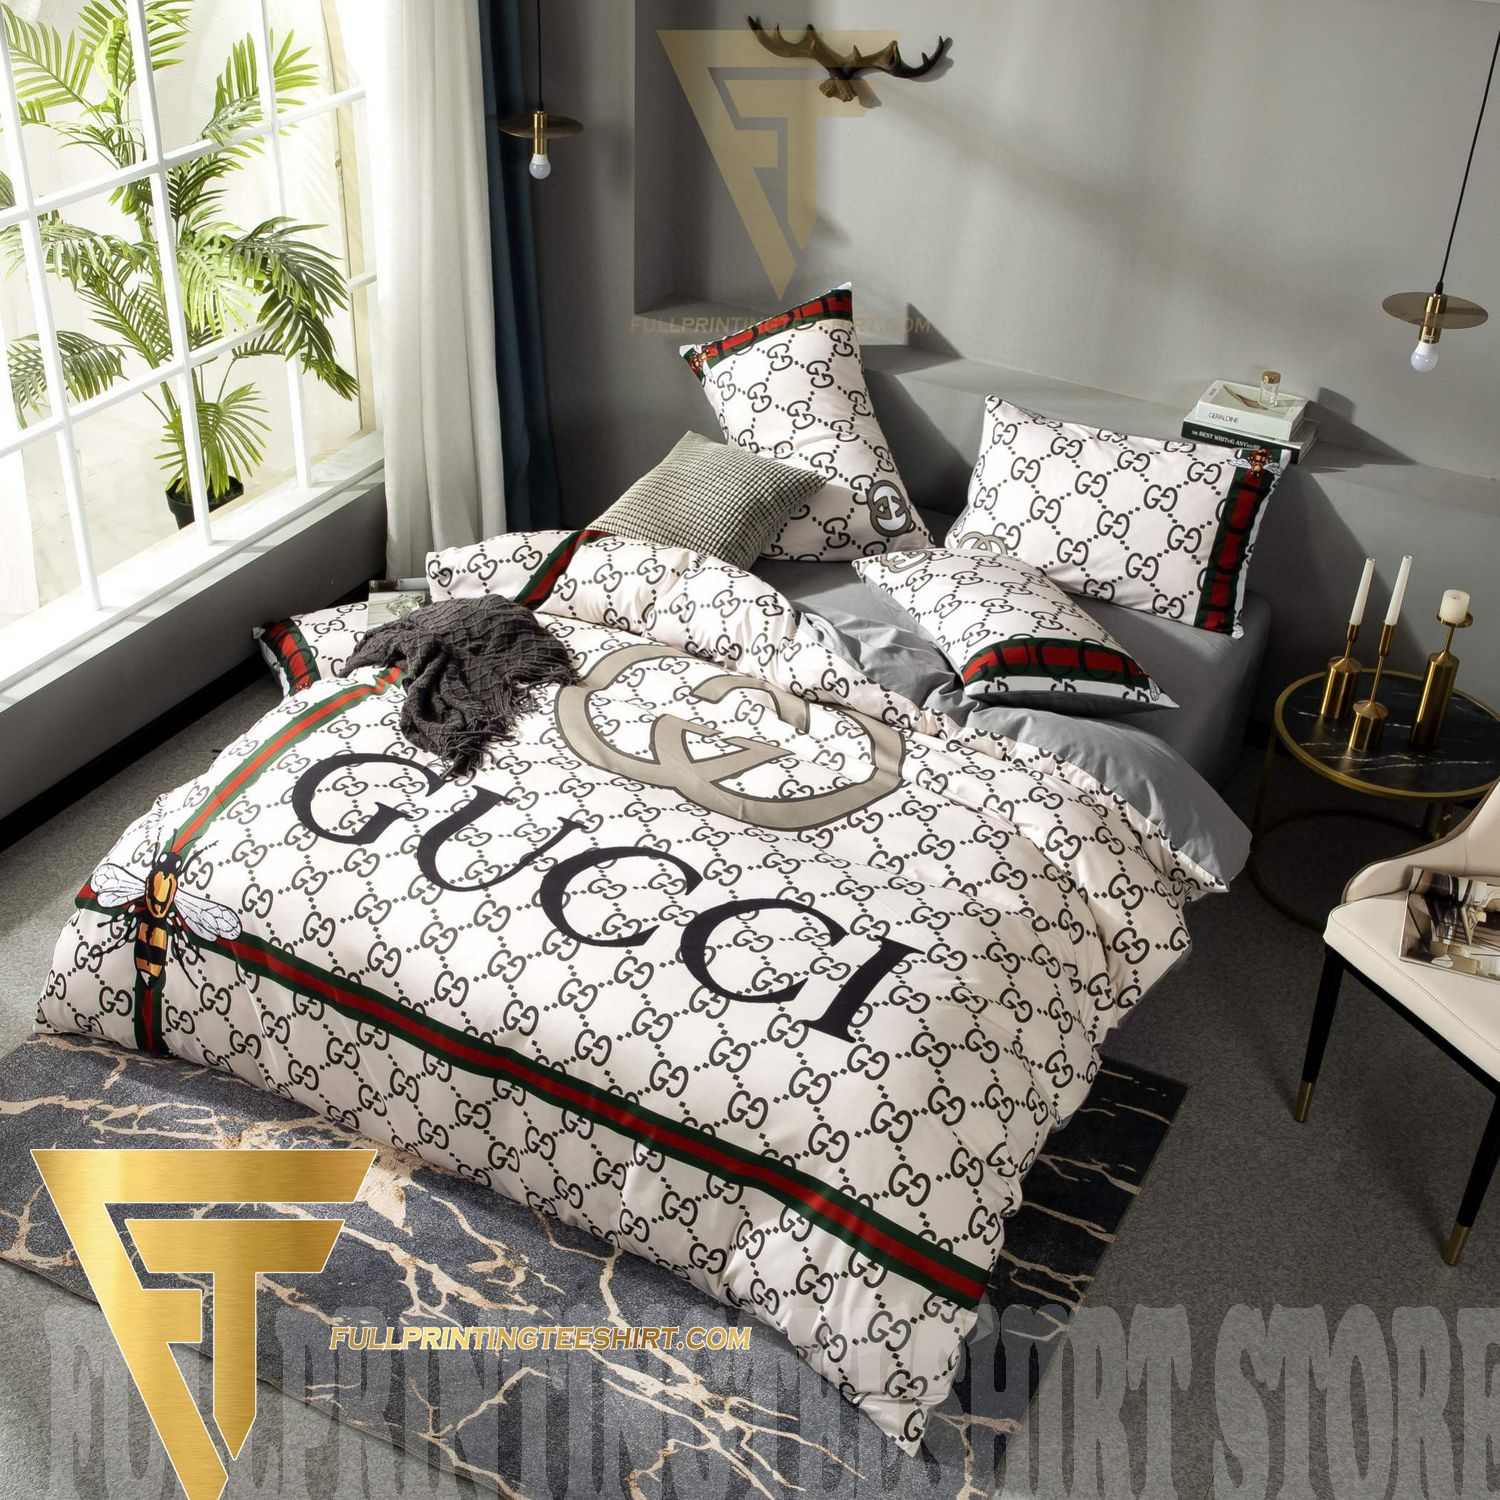 Top-selling item] Gucci Type 187 Luxury Brand Home Decor Duvet Cover Bedroom  Sets